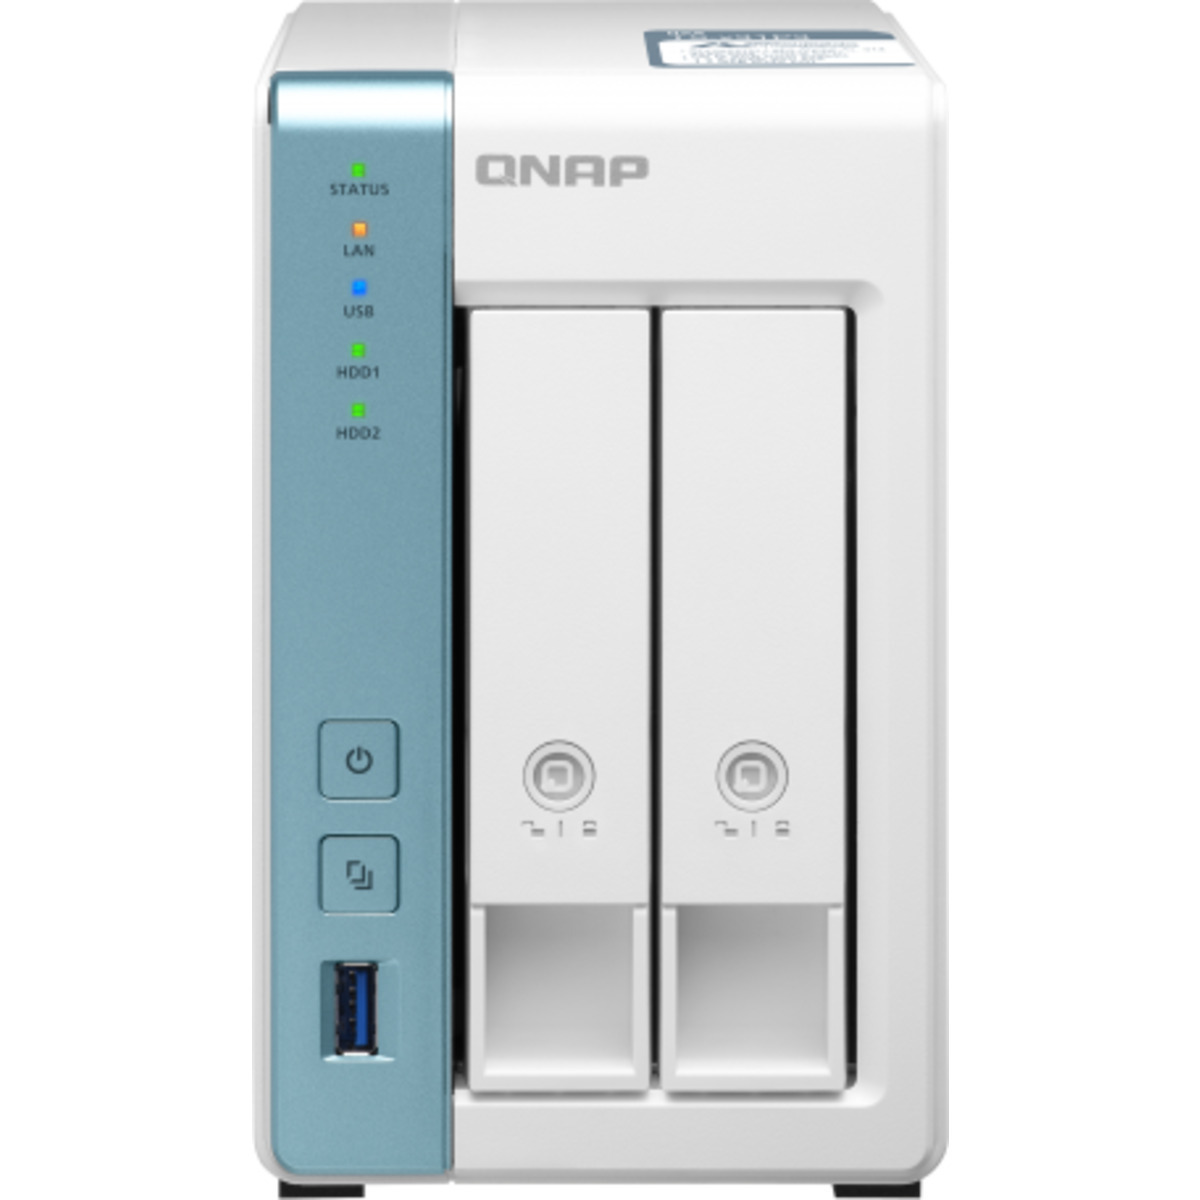 buy $883 QNAP TS-231P3 12tb Desktop NAS - Network Attached Storage Device 2x6000gb Western Digital Ultrastar DC HC310 HUS726T6TALE6L4 3.5 7200rpm SATA 6Gb/s HDD ENTERPRISE Class Drives Installed - Burn-In Tested - FREE RAM UPGRADE - nas headquarters buy network attached storage server device das new raid-5 free shipping usa christmas new year holiday sale TS-231P3